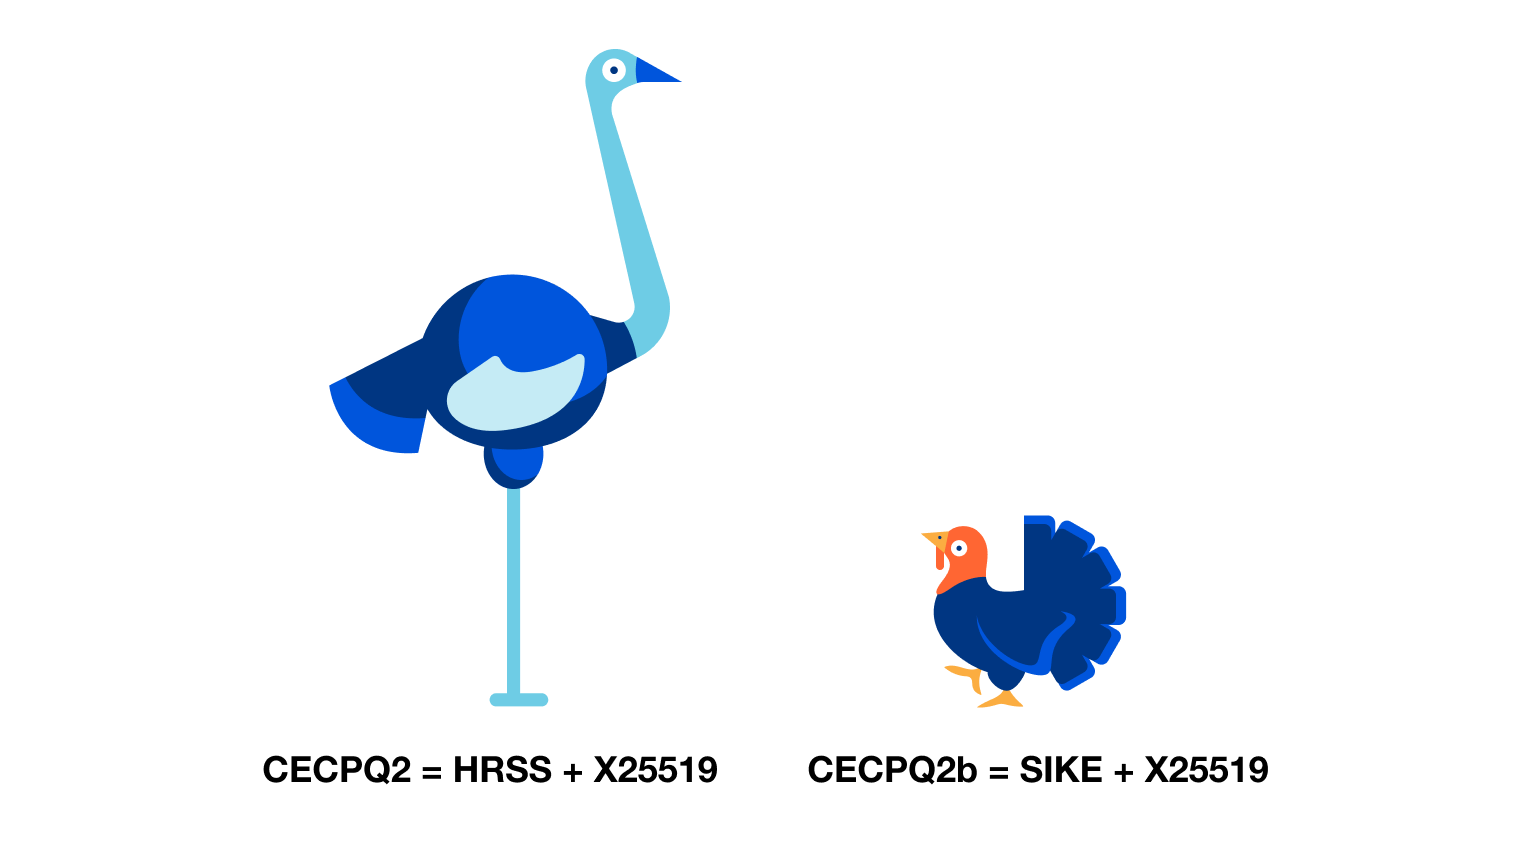 Drawing of an ostrich, a large, but very fast running bird, to depict the CECPQ2 (HRSS+X25519) experiment, and a drawing of a turkey (a smaller, slower bird) to depict the CECPQ2b (SIKE+X25519) experiment.